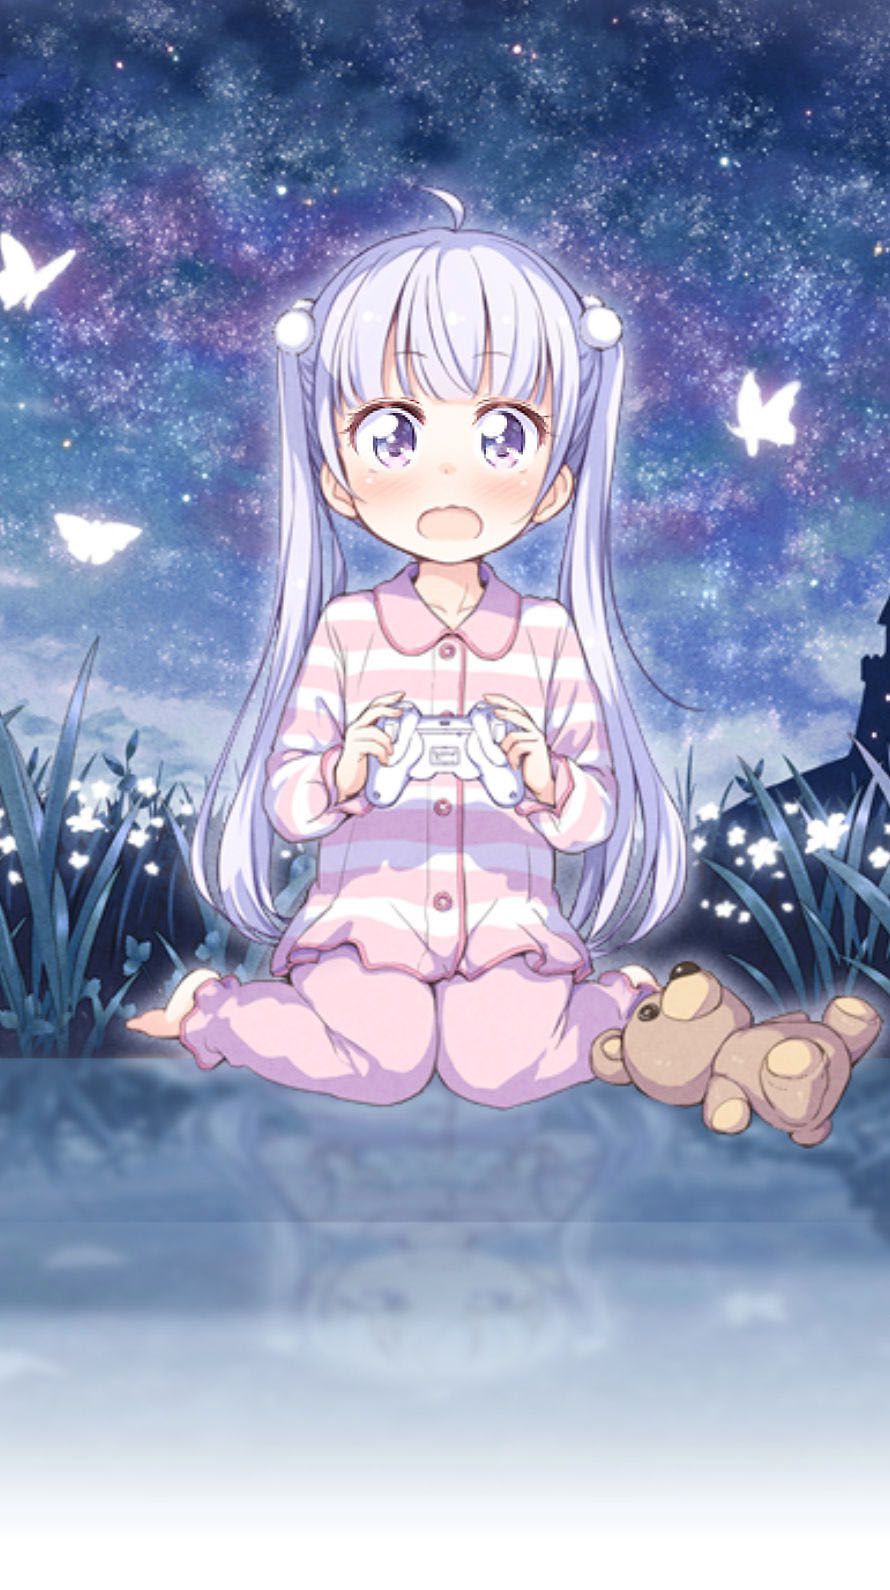 NEW GAME!涼風青葉iPhone壁紙